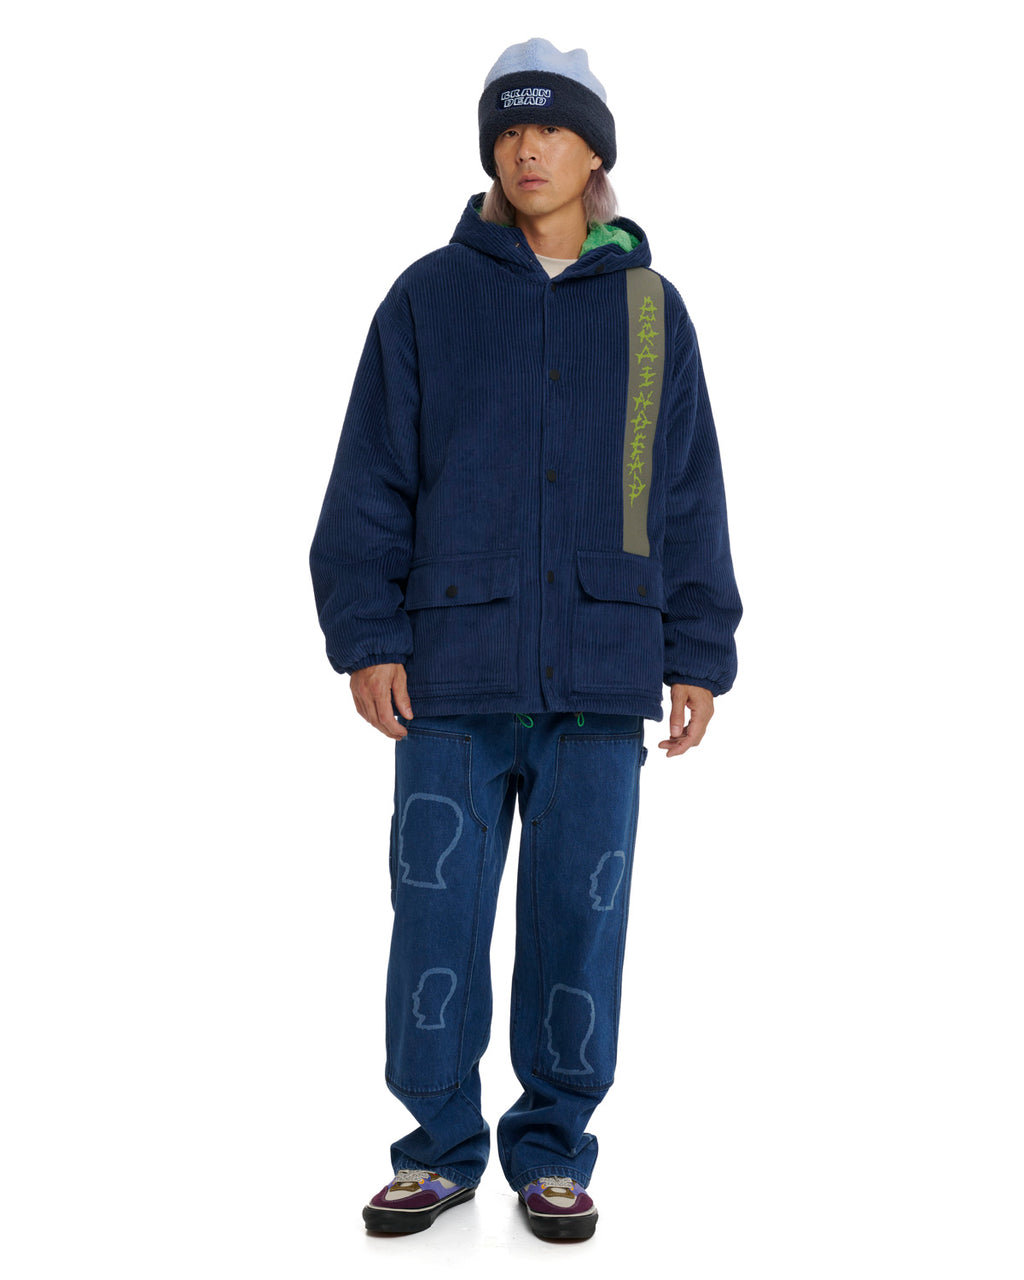 Forest Racing Jacket - Navy 4